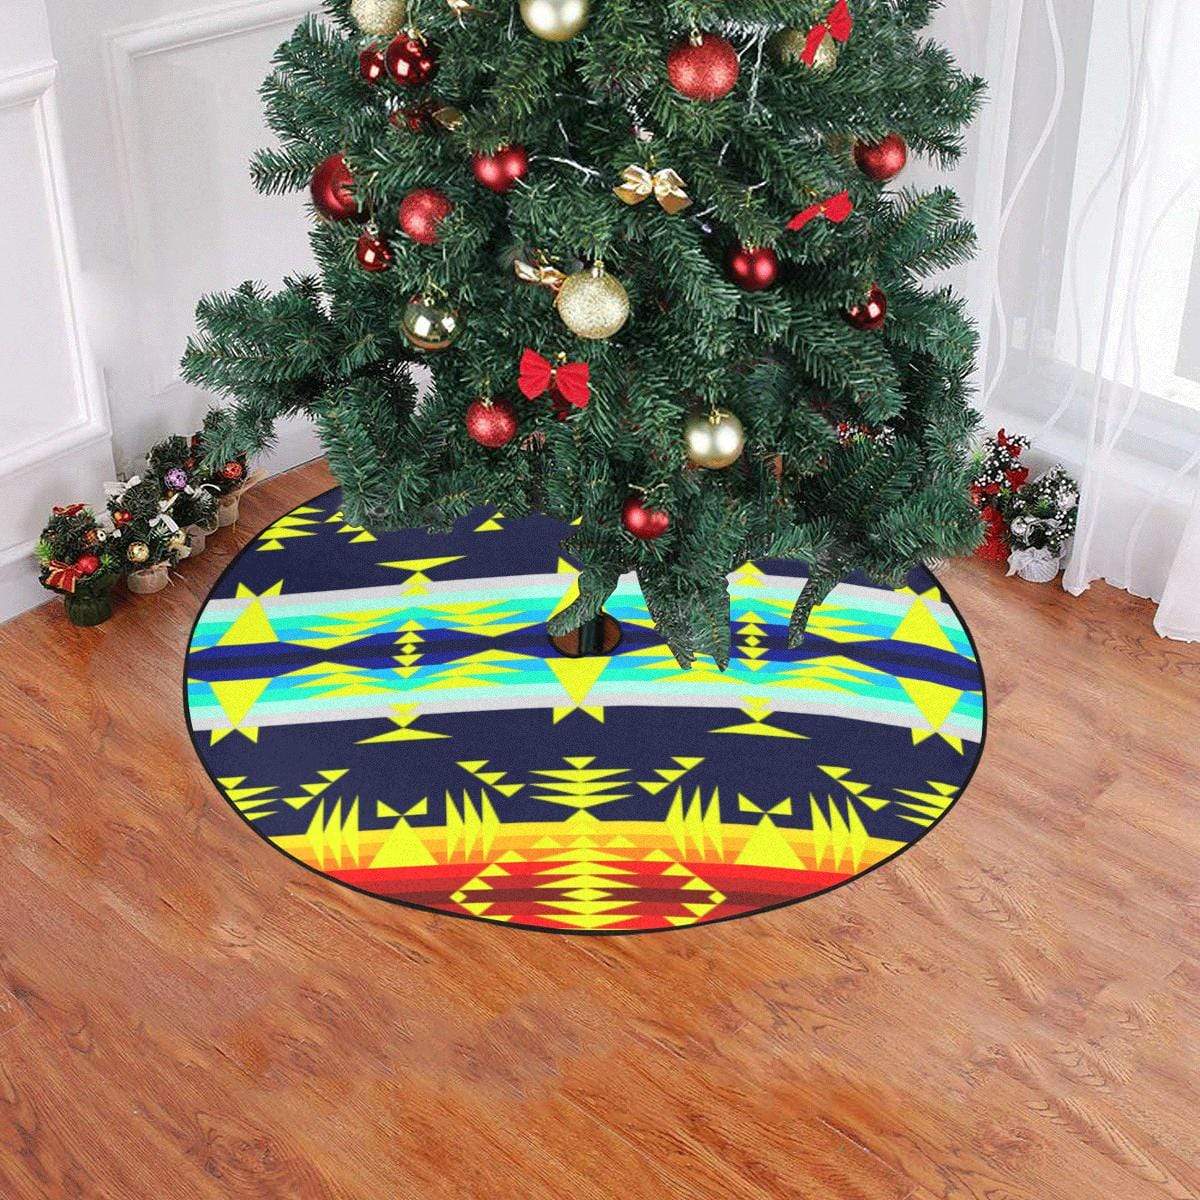 Between the Mountains Navy Yellow Christmas Tree Skirt 47" x 47" Christmas Tree Skirt e-joyer 